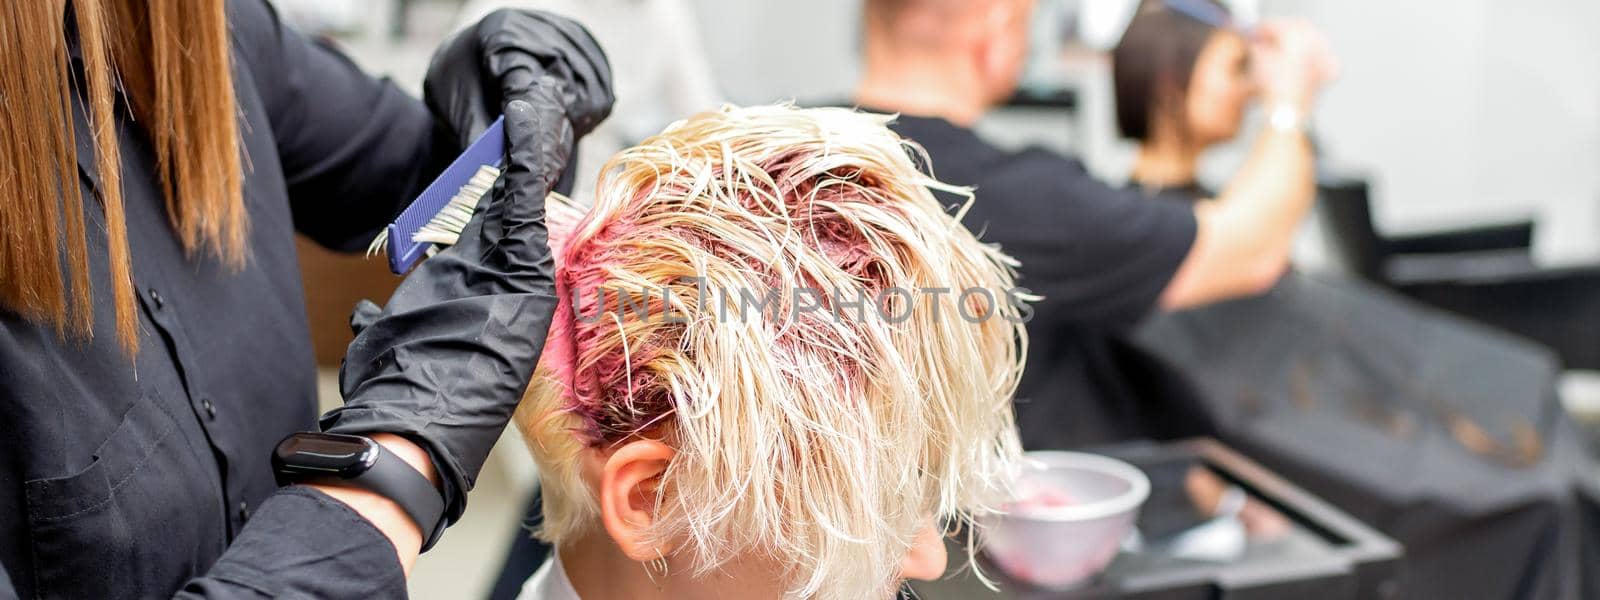 The professional hairdresser uses a brush to apply the pink dye to the hair. Hair coloring concept. by okskukuruza